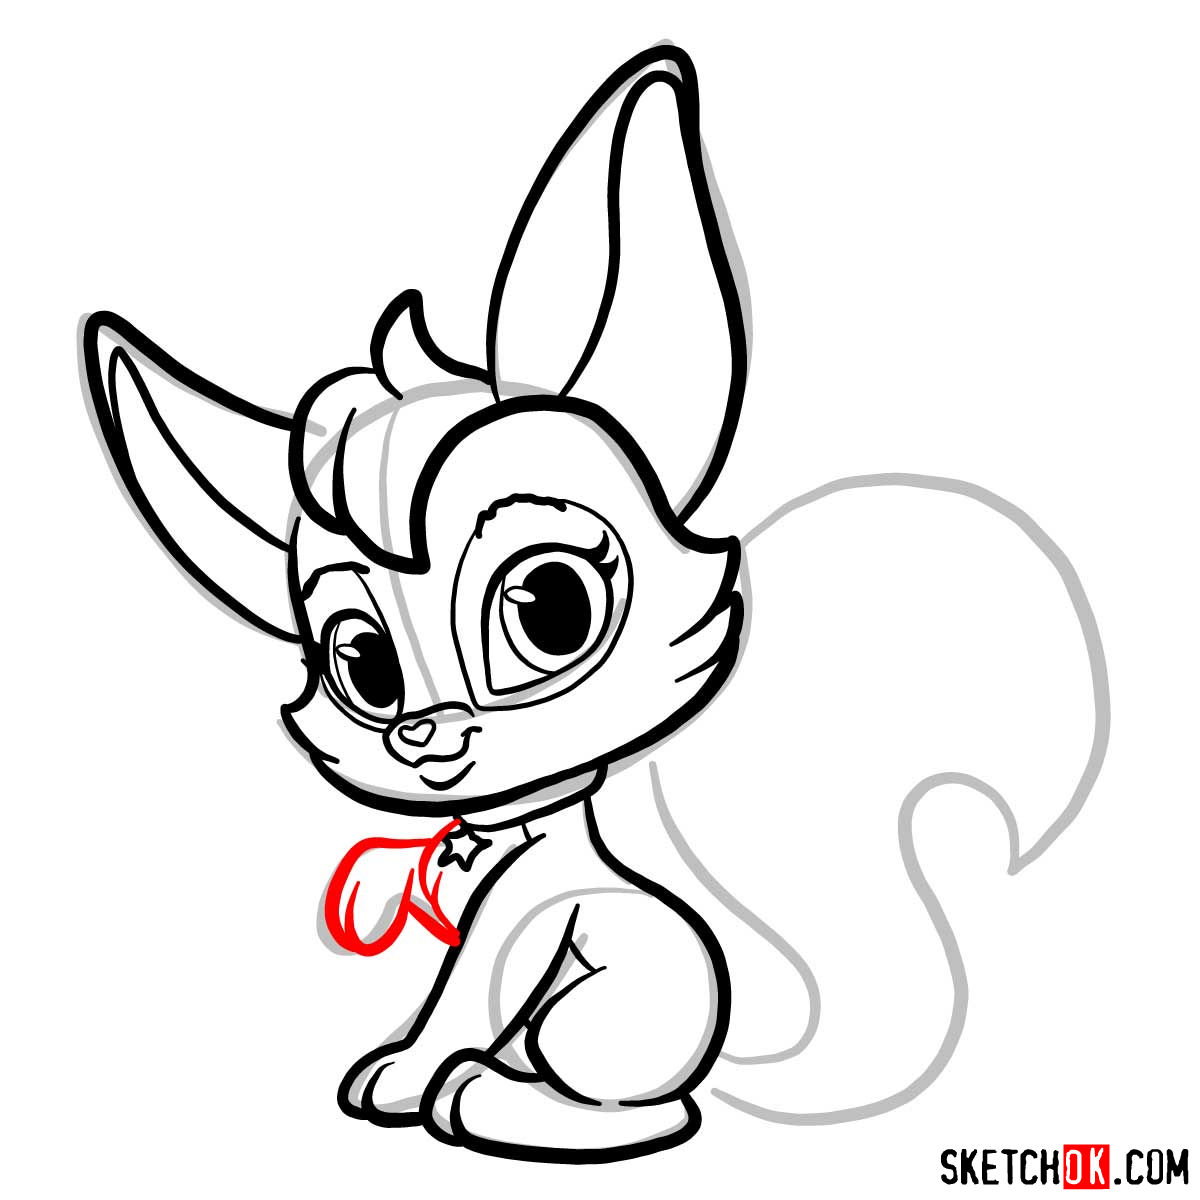 How to draw Parisa, a pet from Shimmer and Shine - step 07